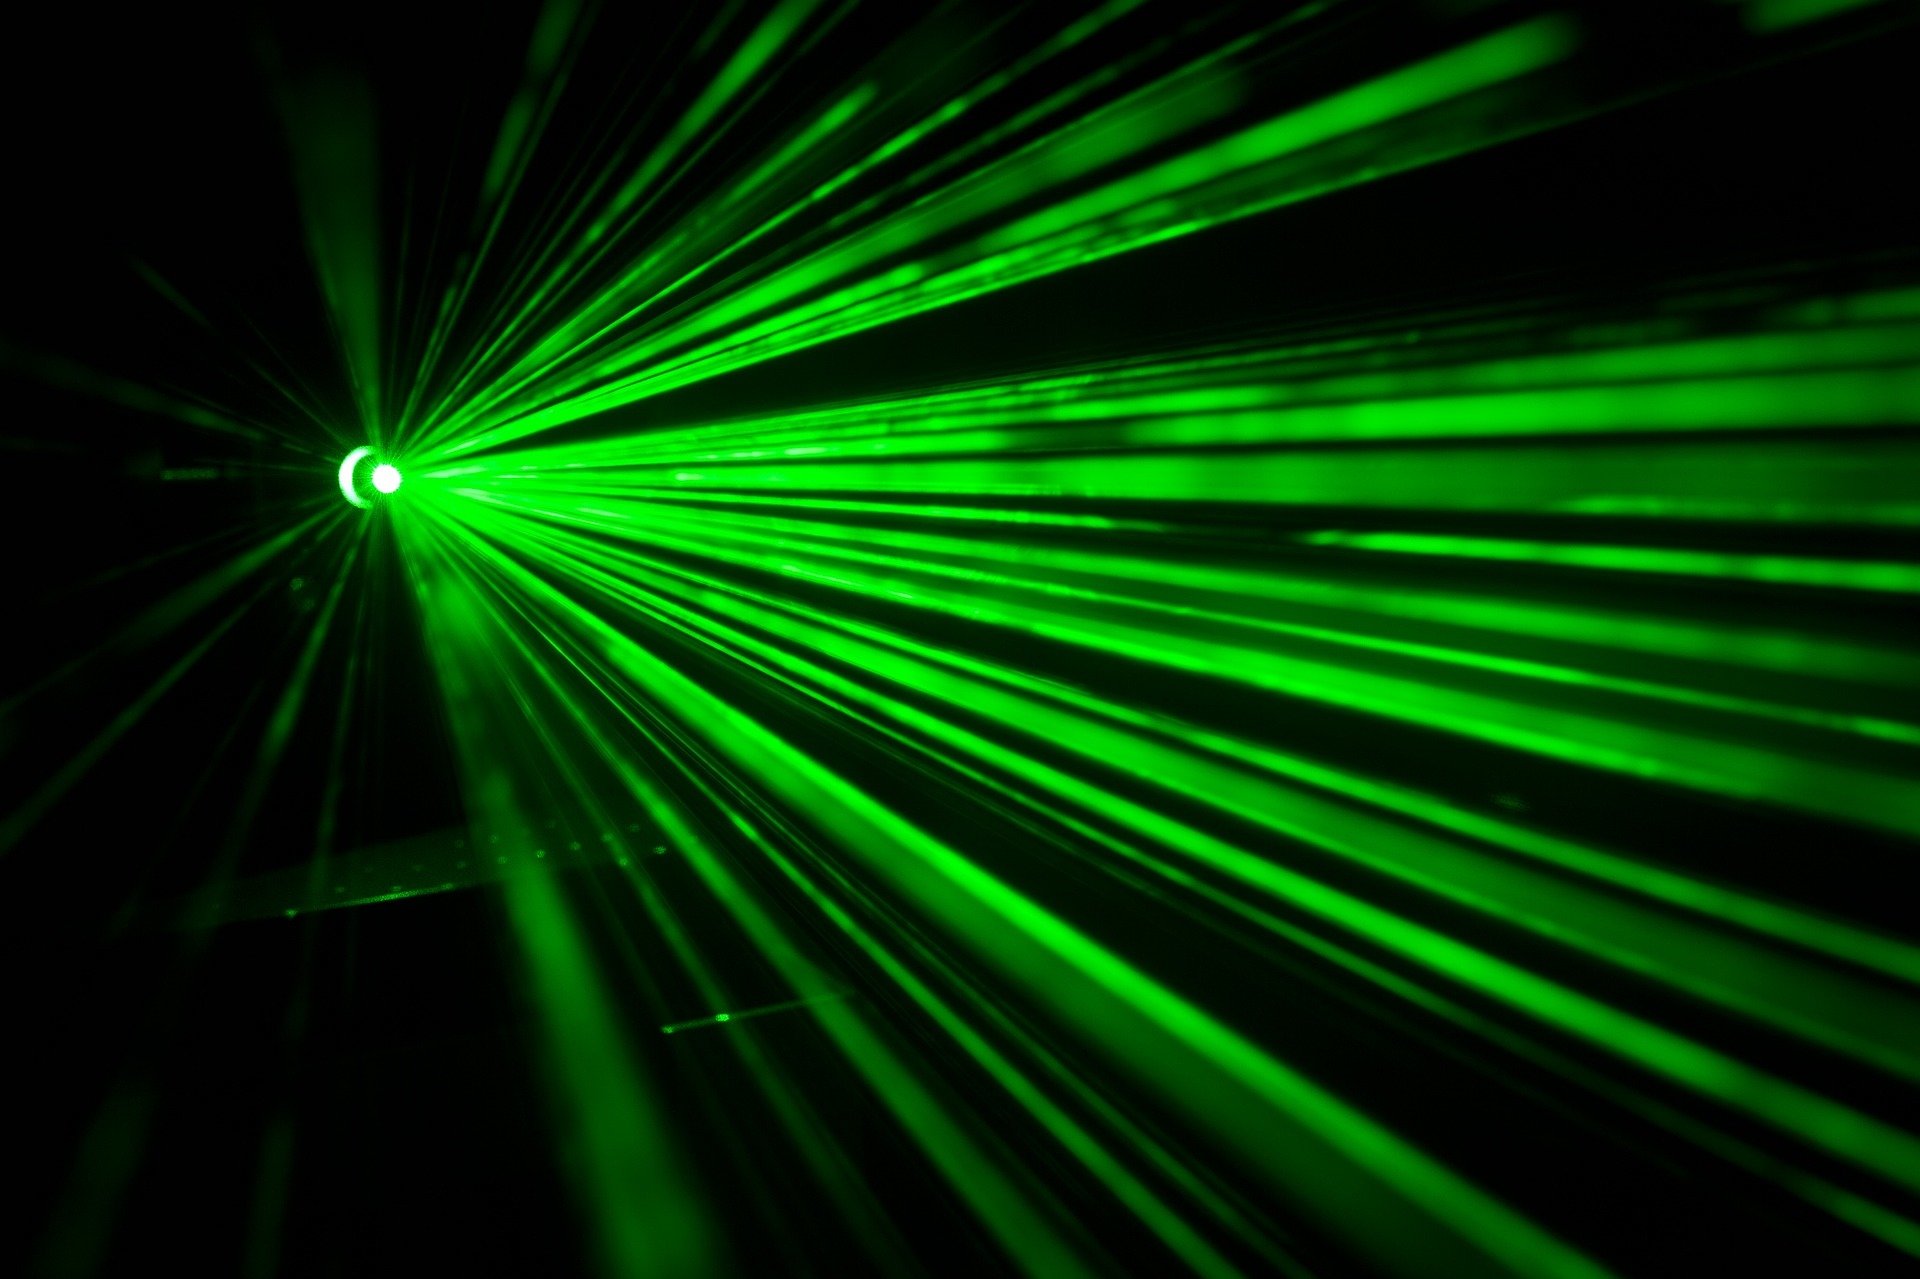 Physicists make laser beams visible in vacuum